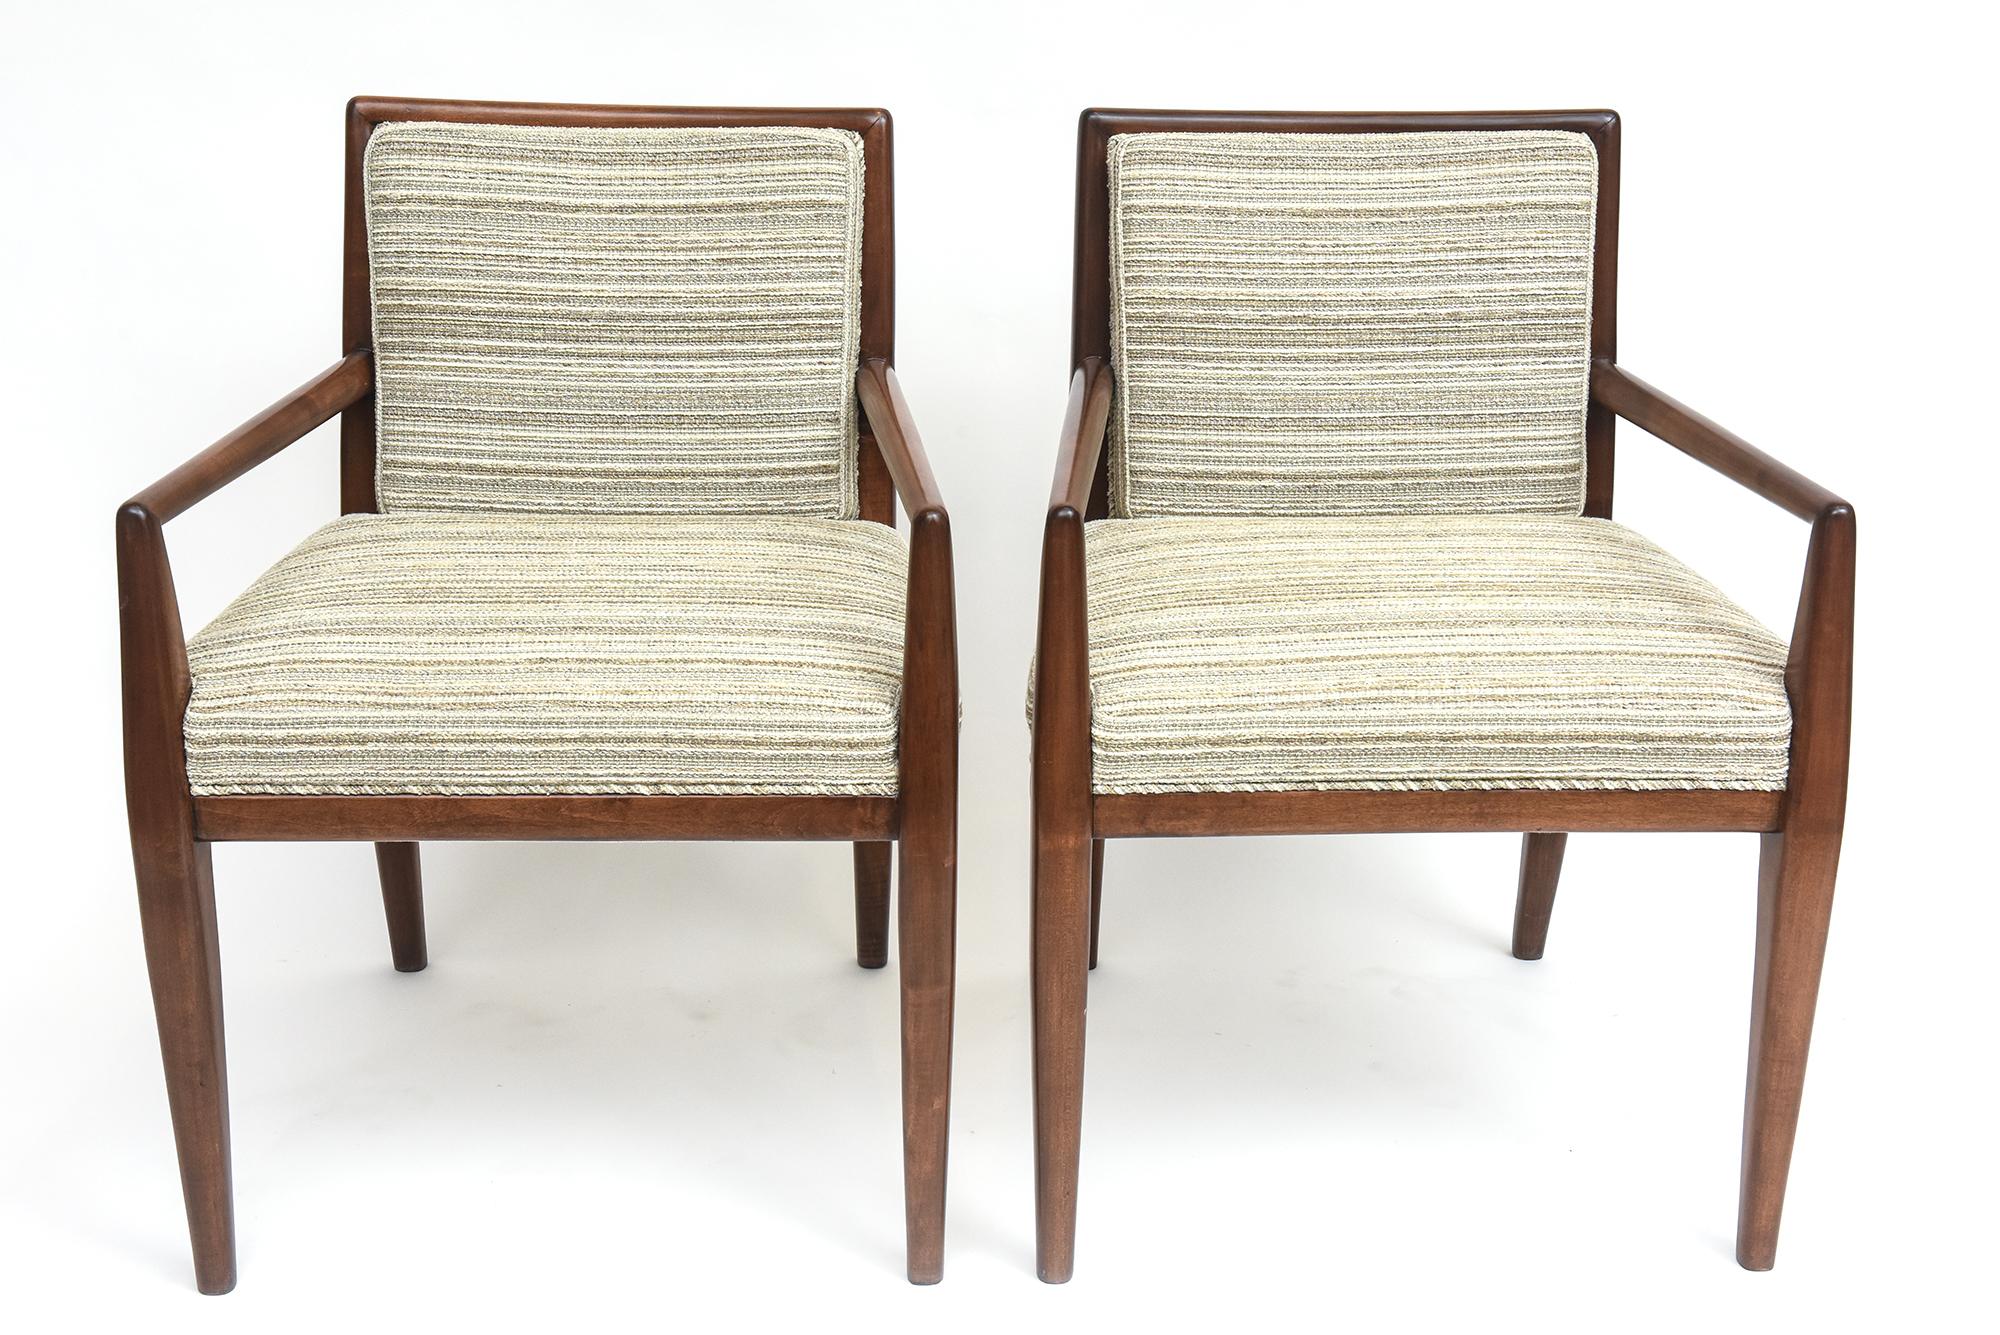 Newly upholstered solid walnut armchairs by T. H. Robsjohn-Gibbings for Widdicomb Furniture, circa 1950. Two available, priced and sold individually at $3200 each.